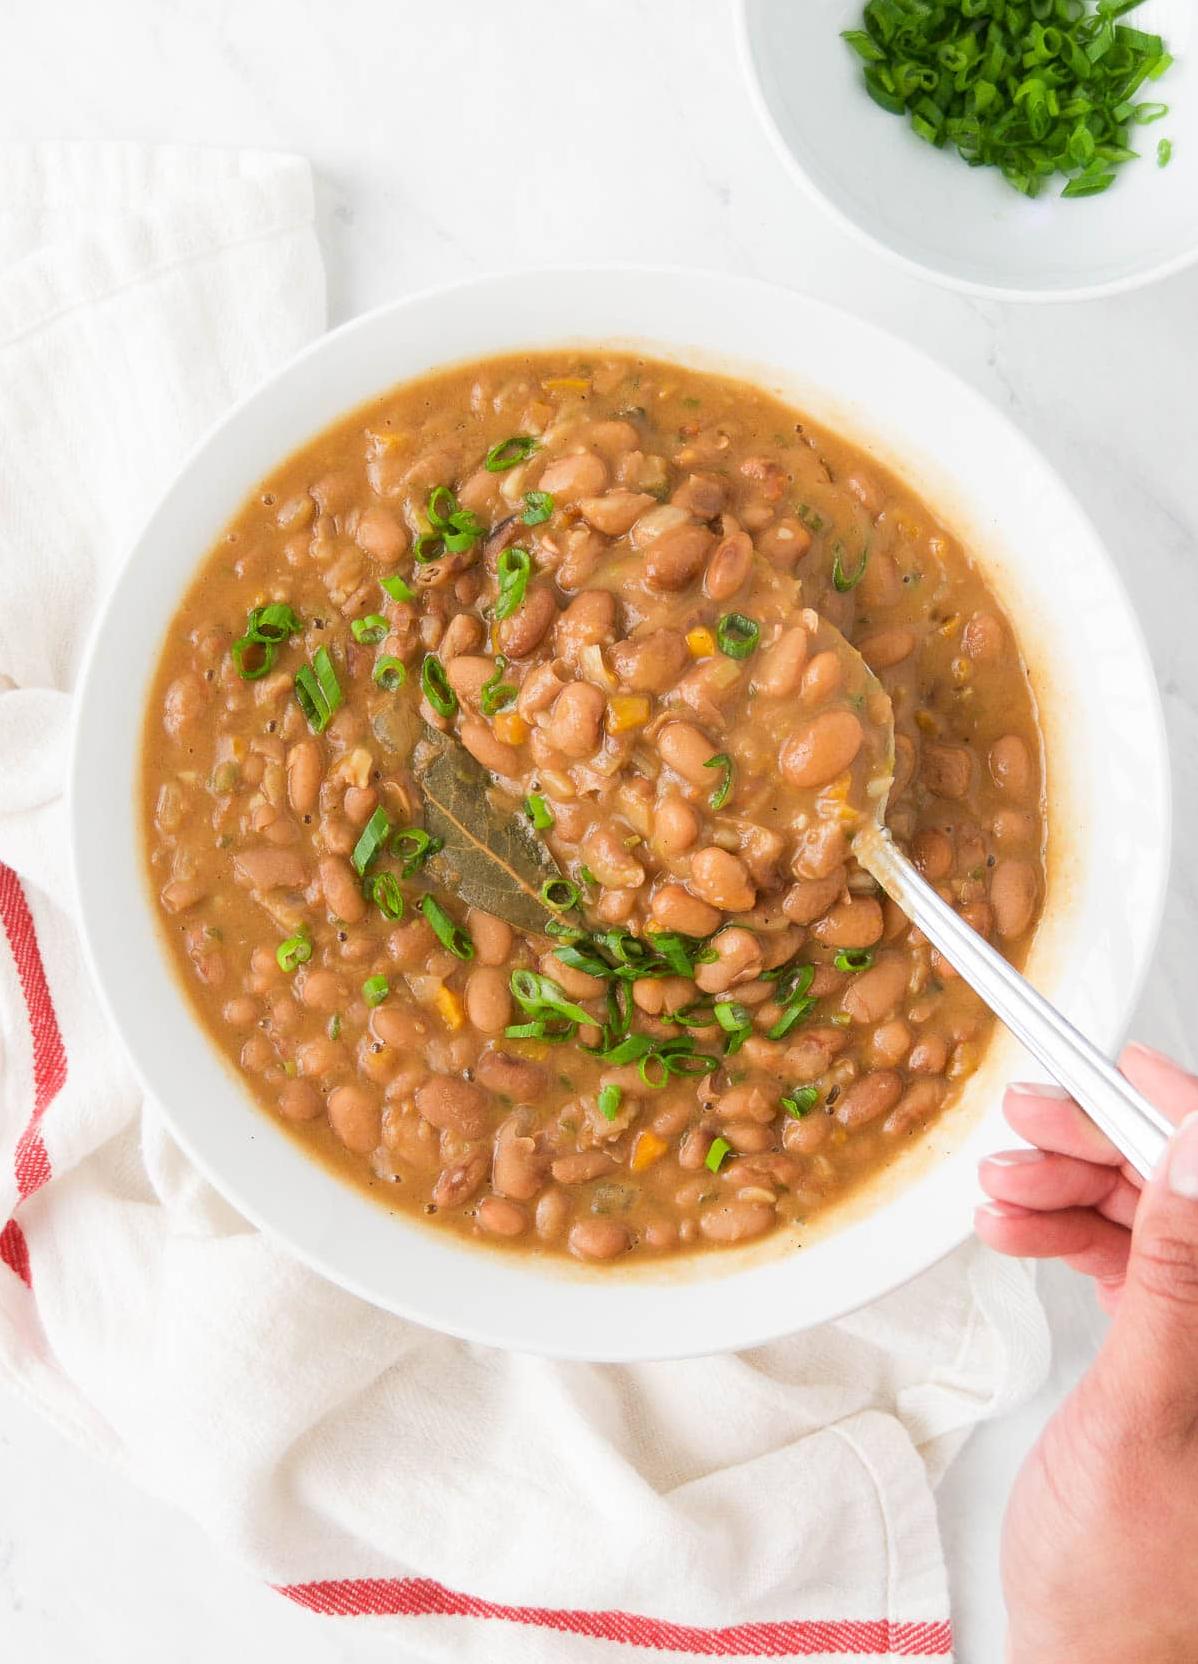  Say goodbye to canned pinto beans and hello to homemade goodness